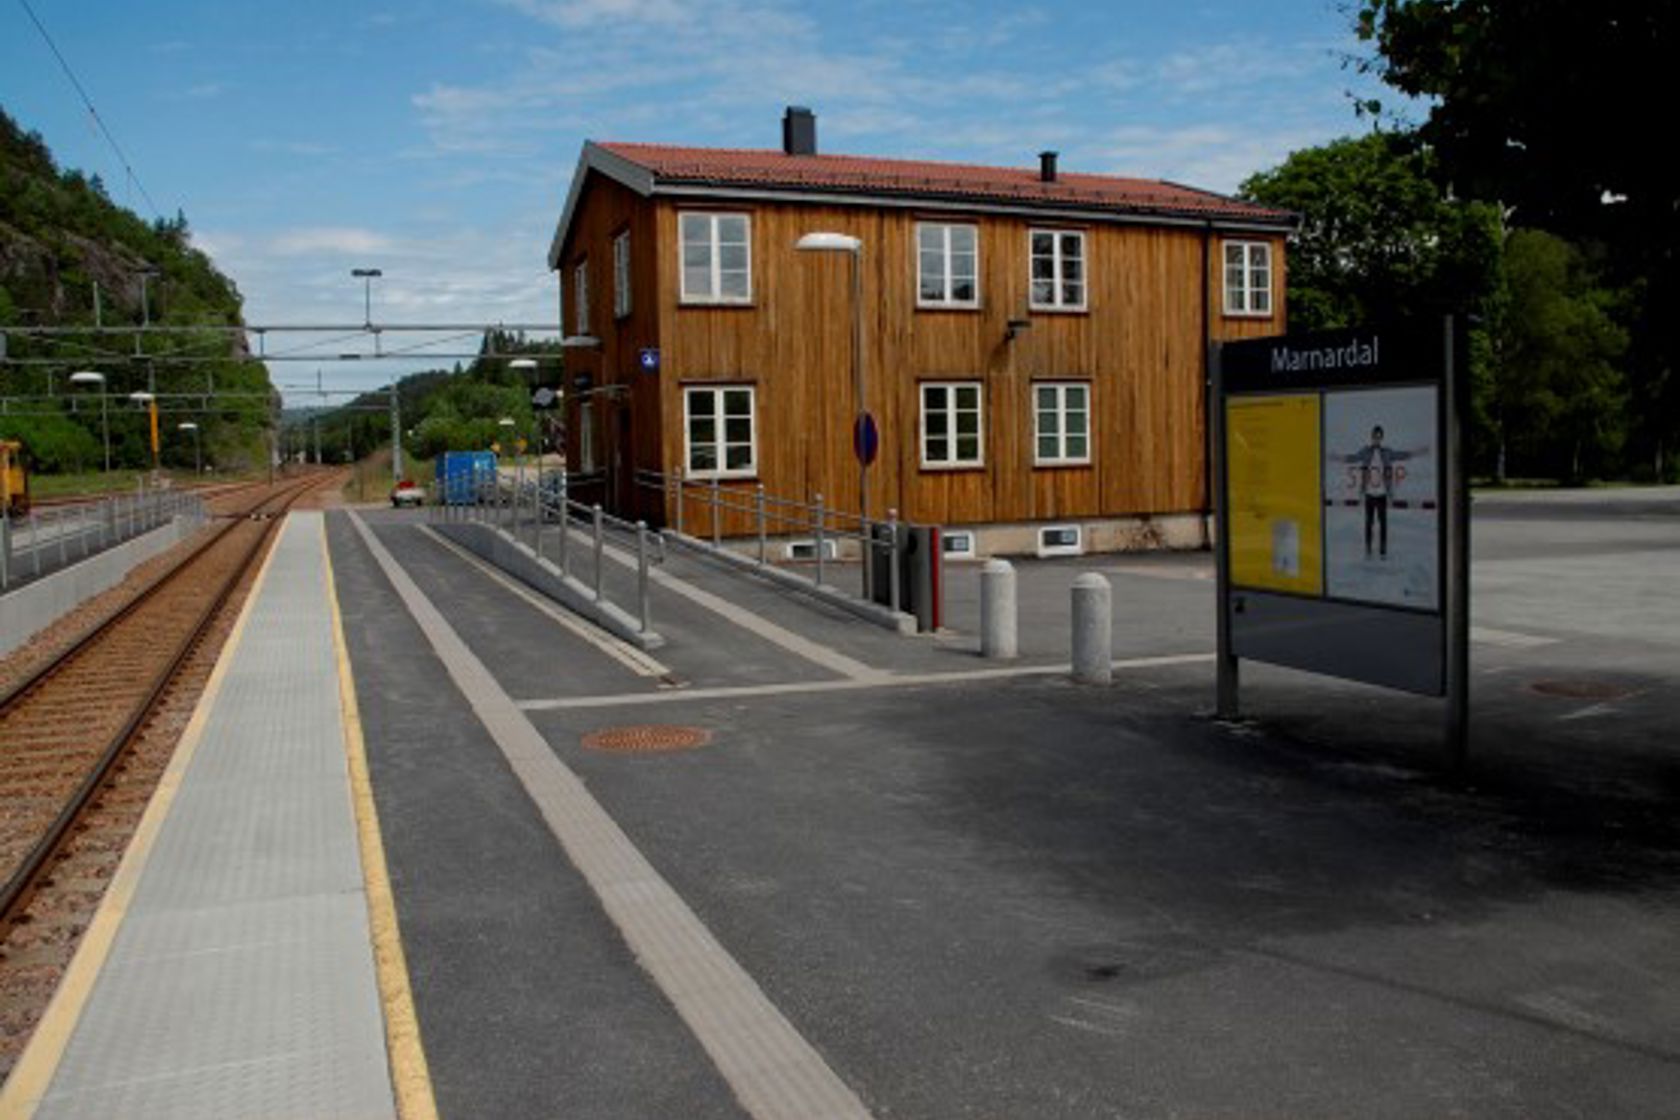 Exterior view of Marnardal station